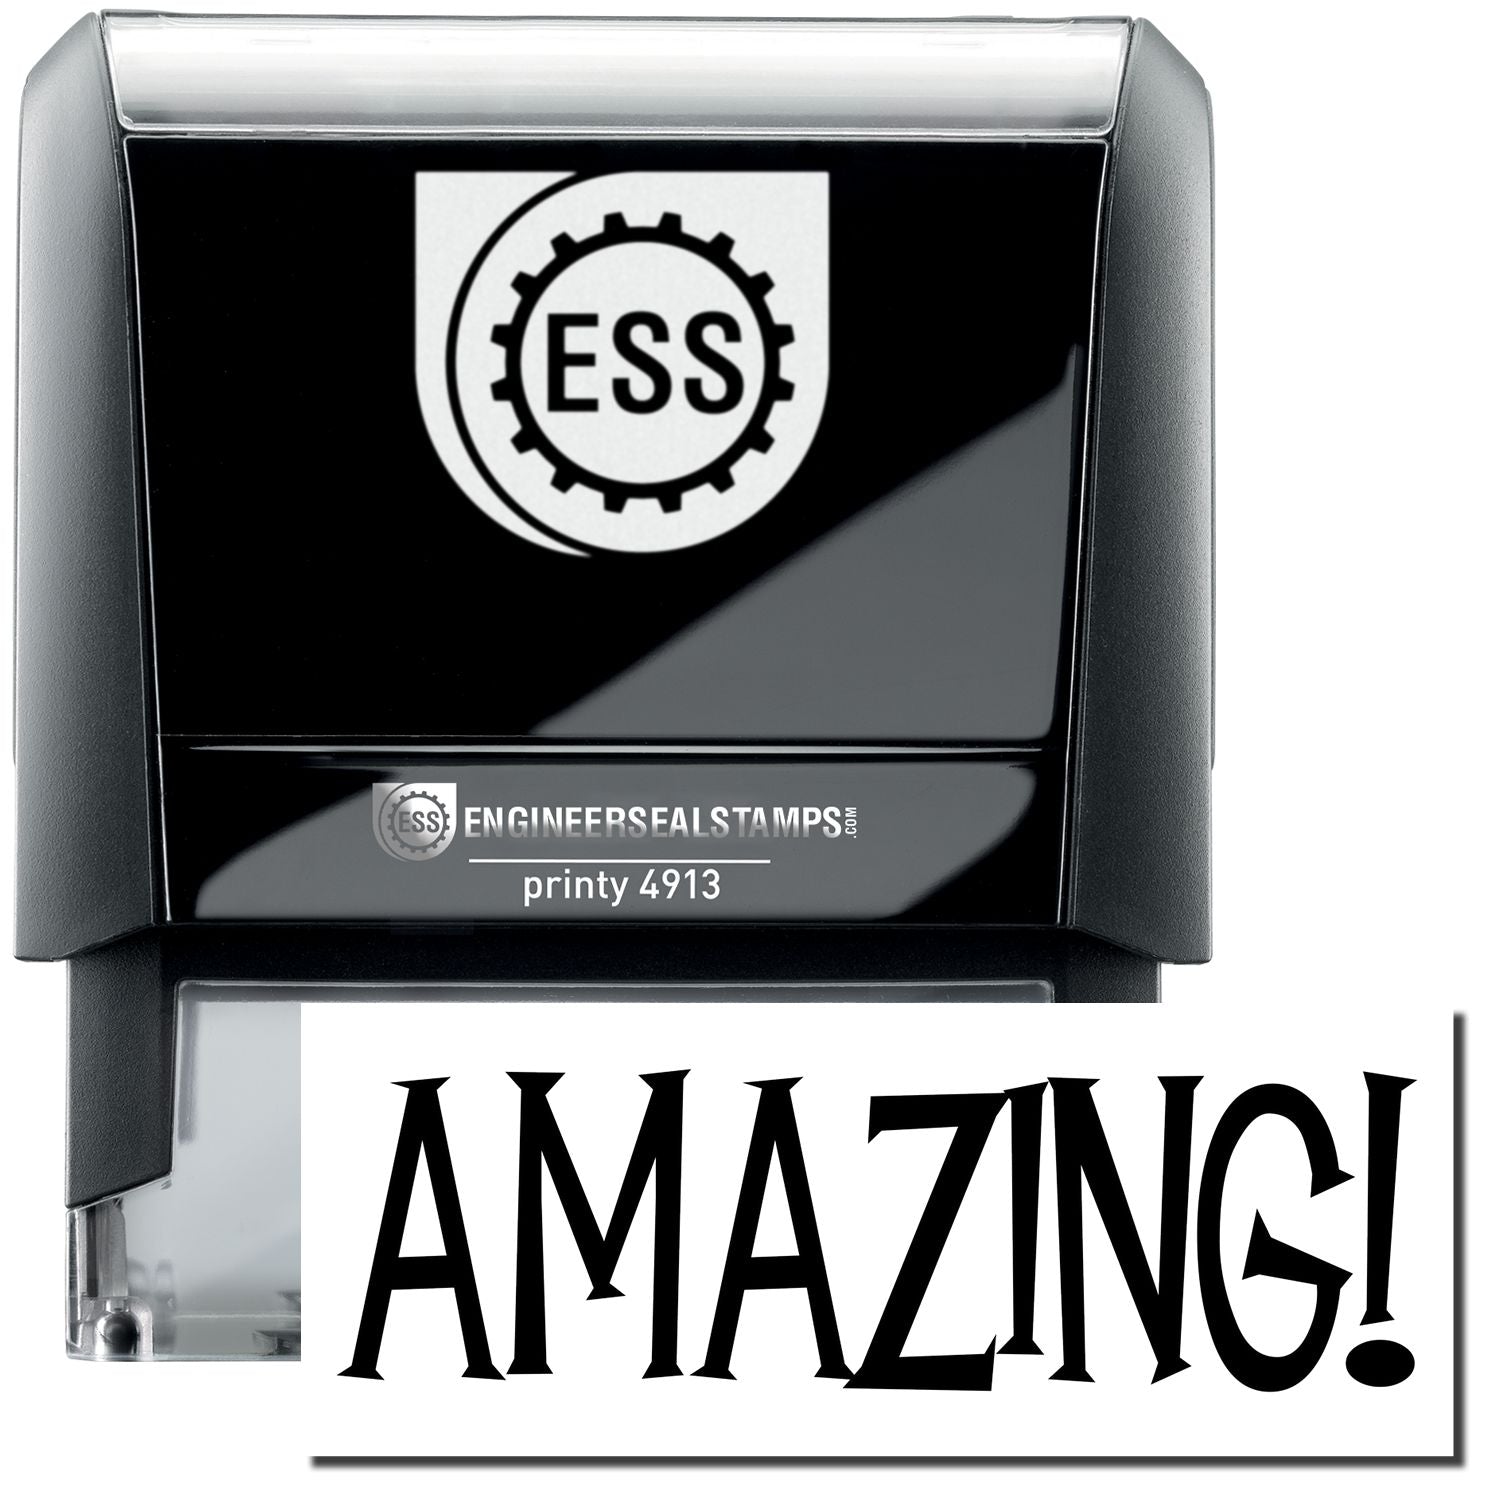 A self-inking stamp with a stamped image showing how the text "AMAZING!" in a unique large bold font is displayed by it.